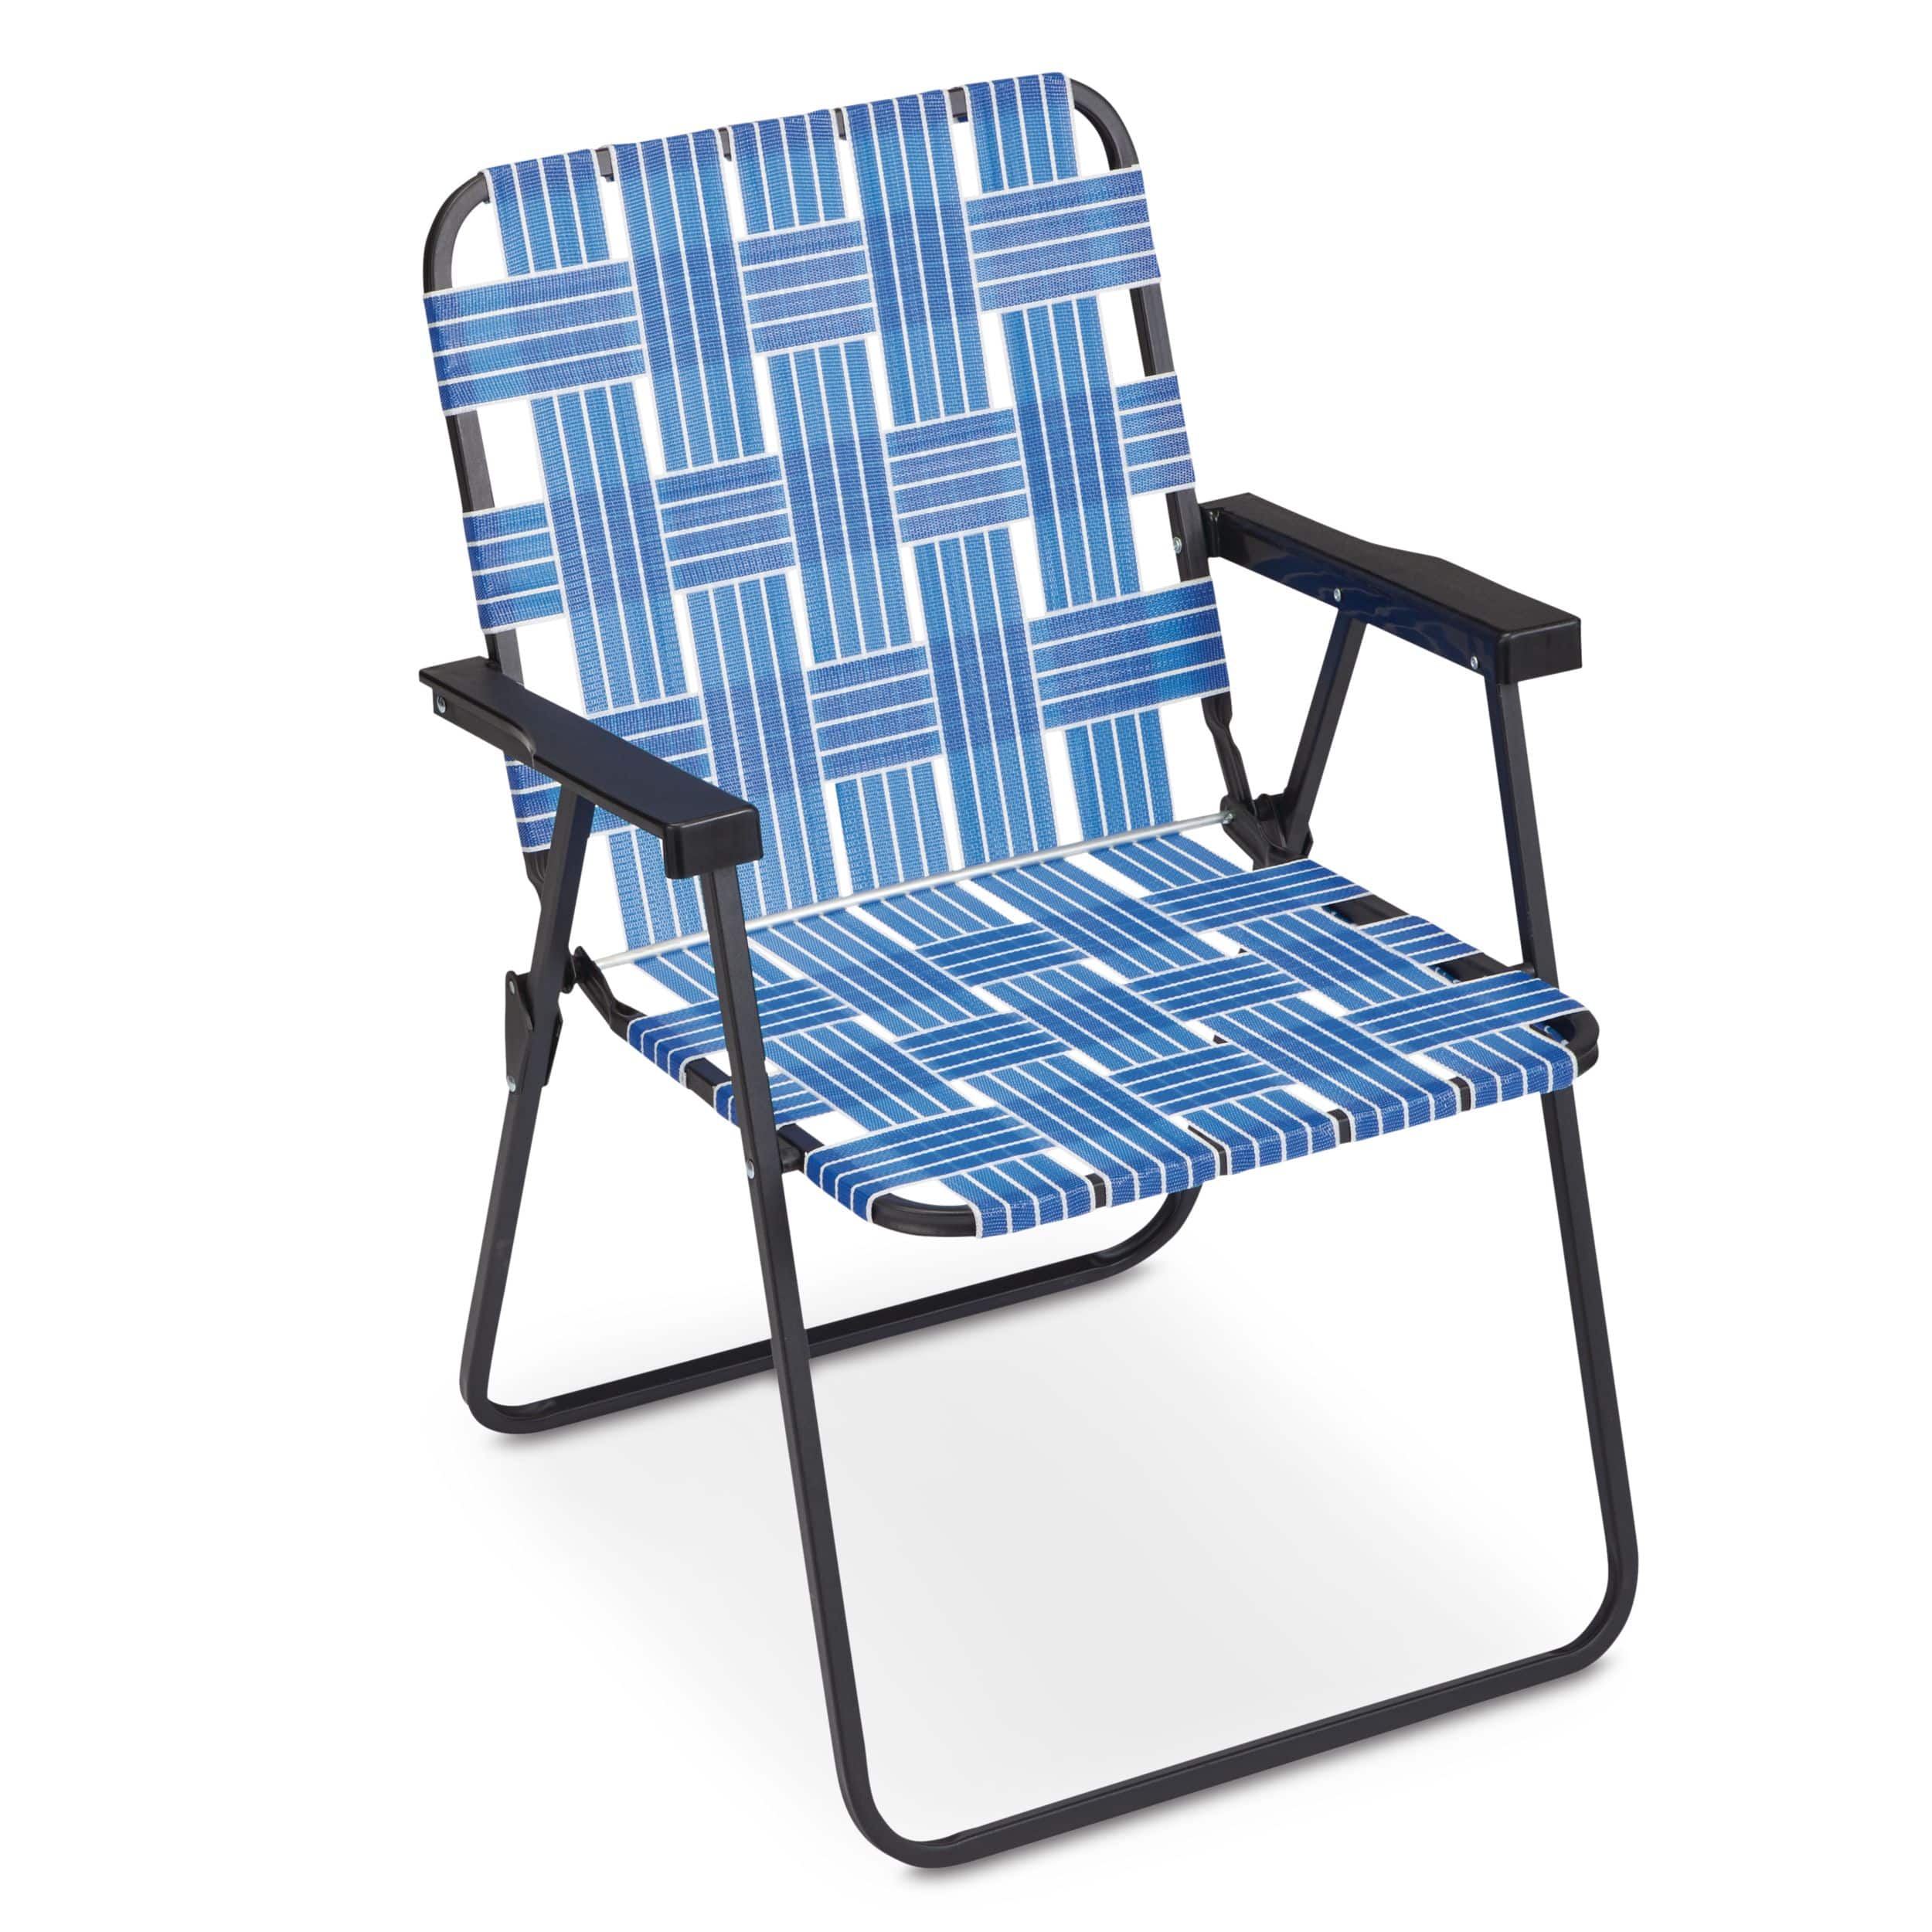 Outbound Classic Retro Portable Folding Webbed Lawn Chair For